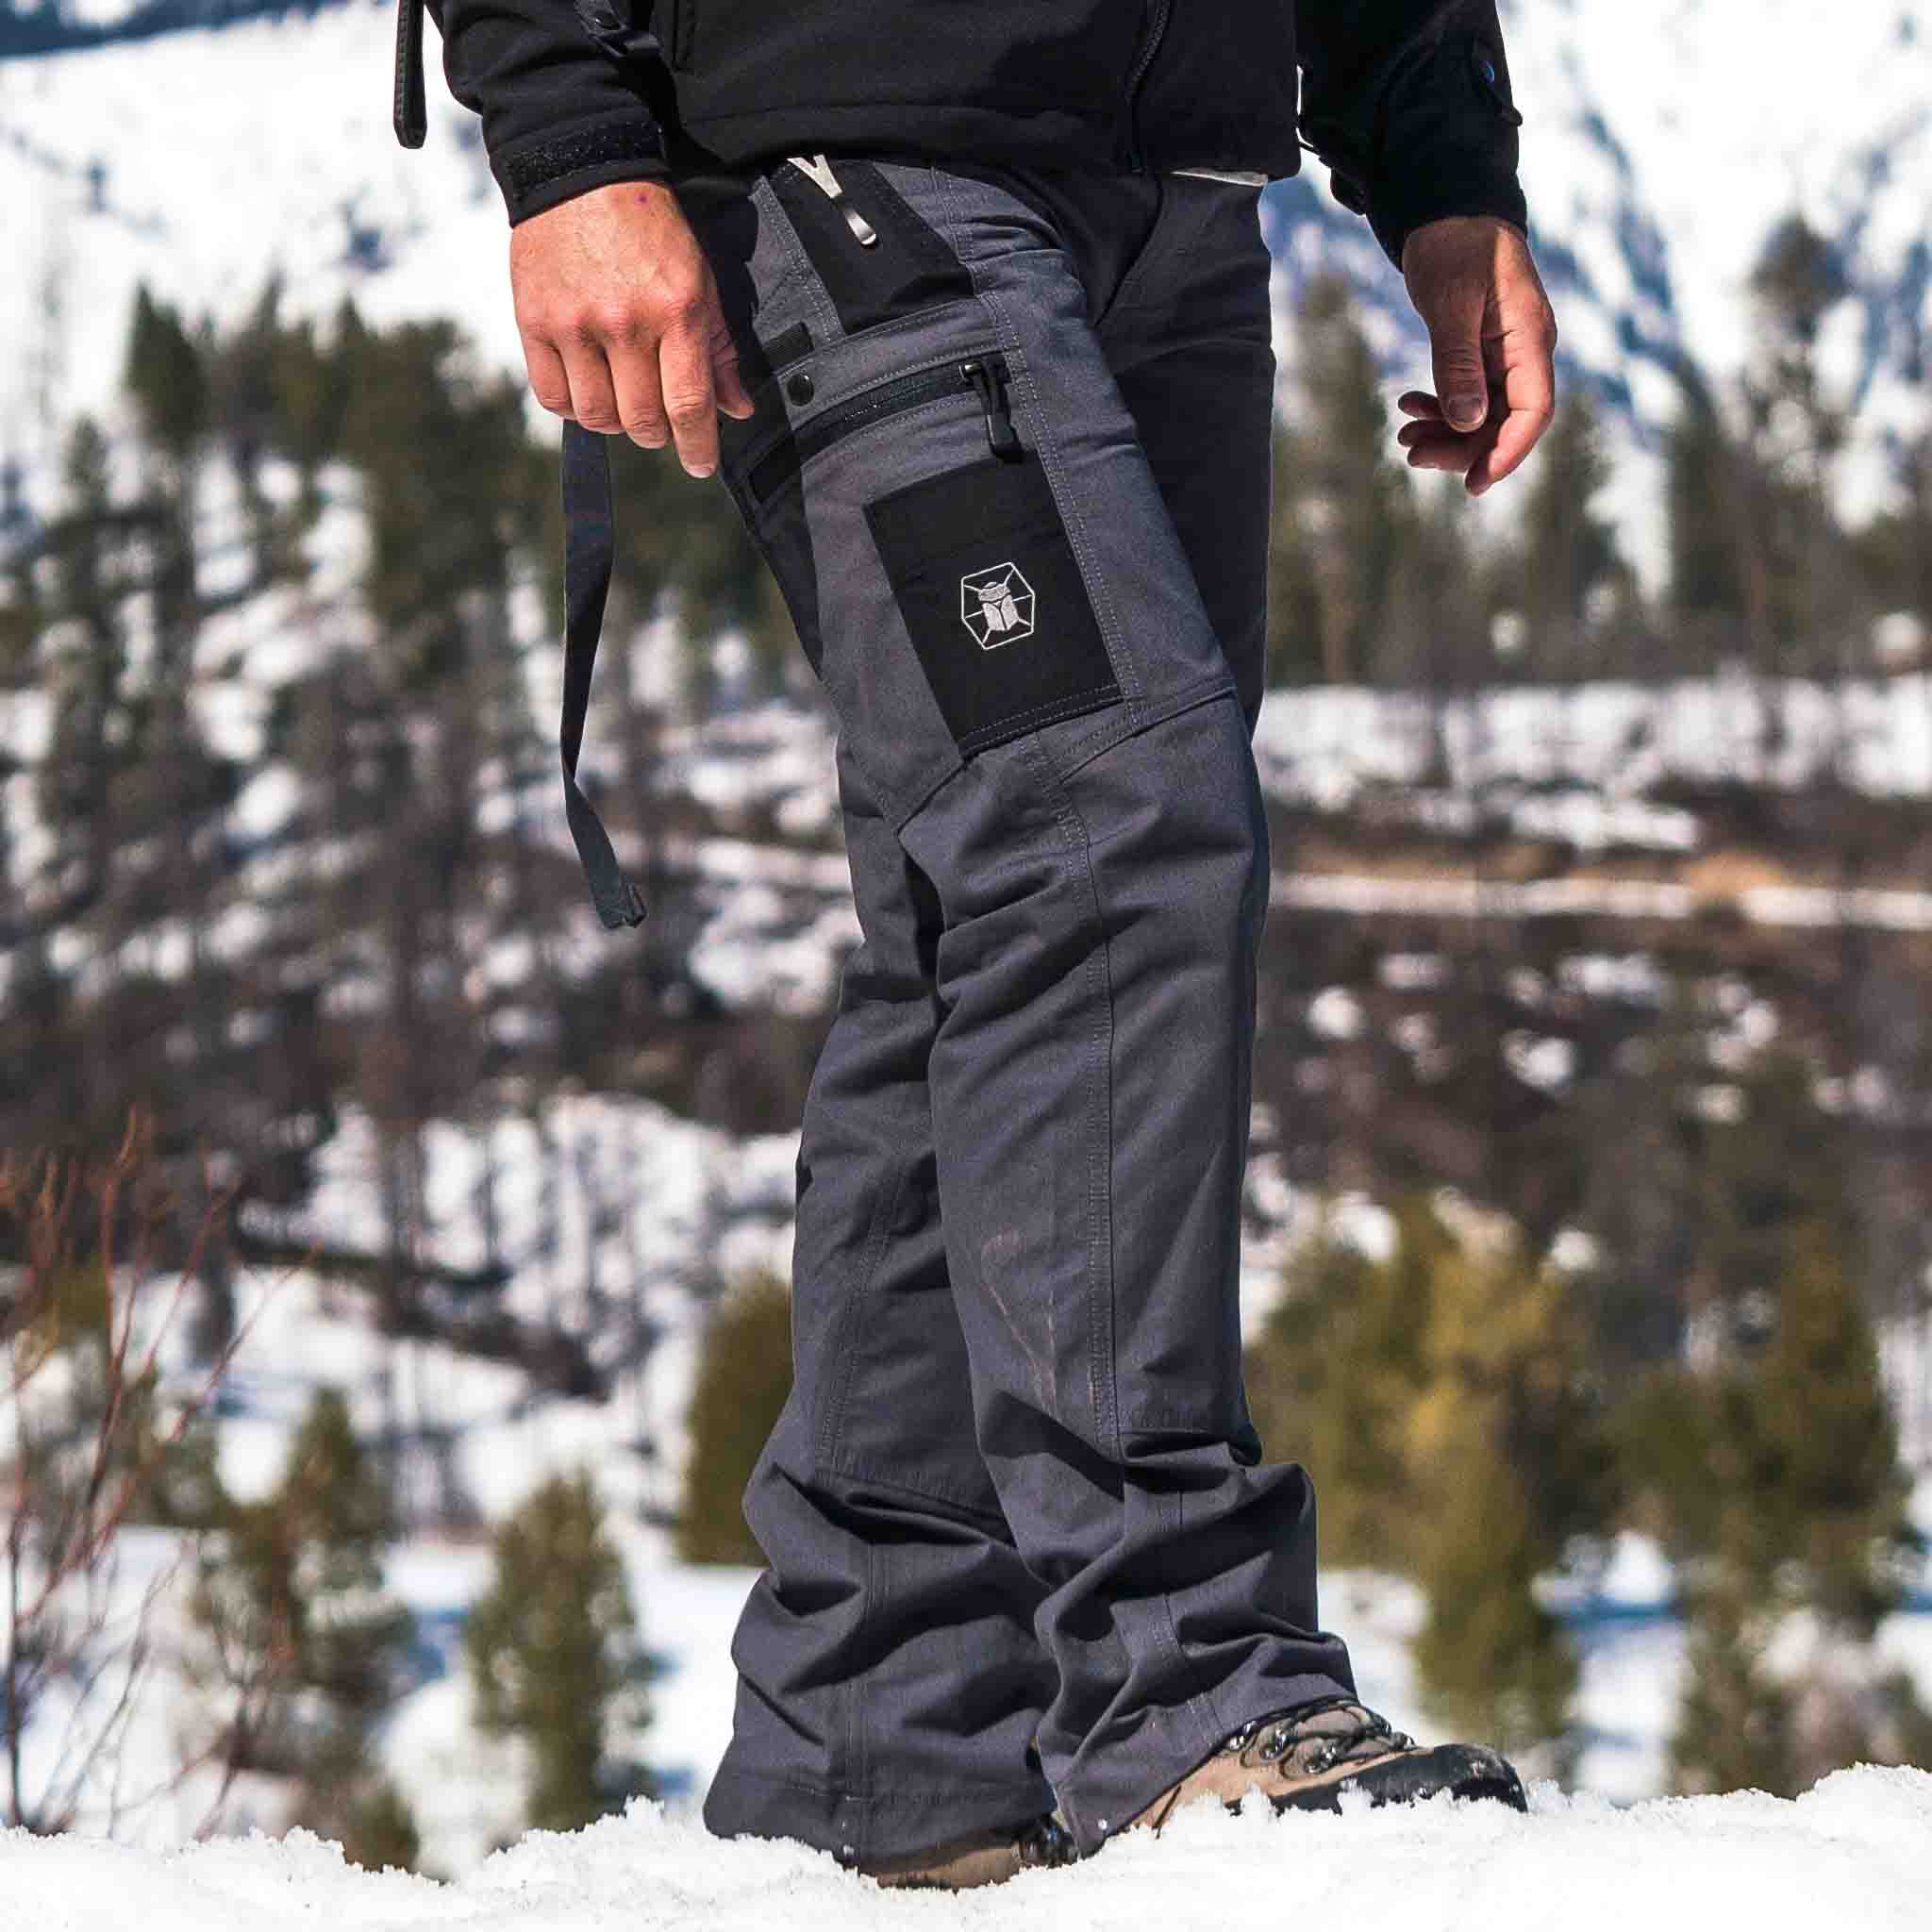 RSP Tactical Pants – Kitanica